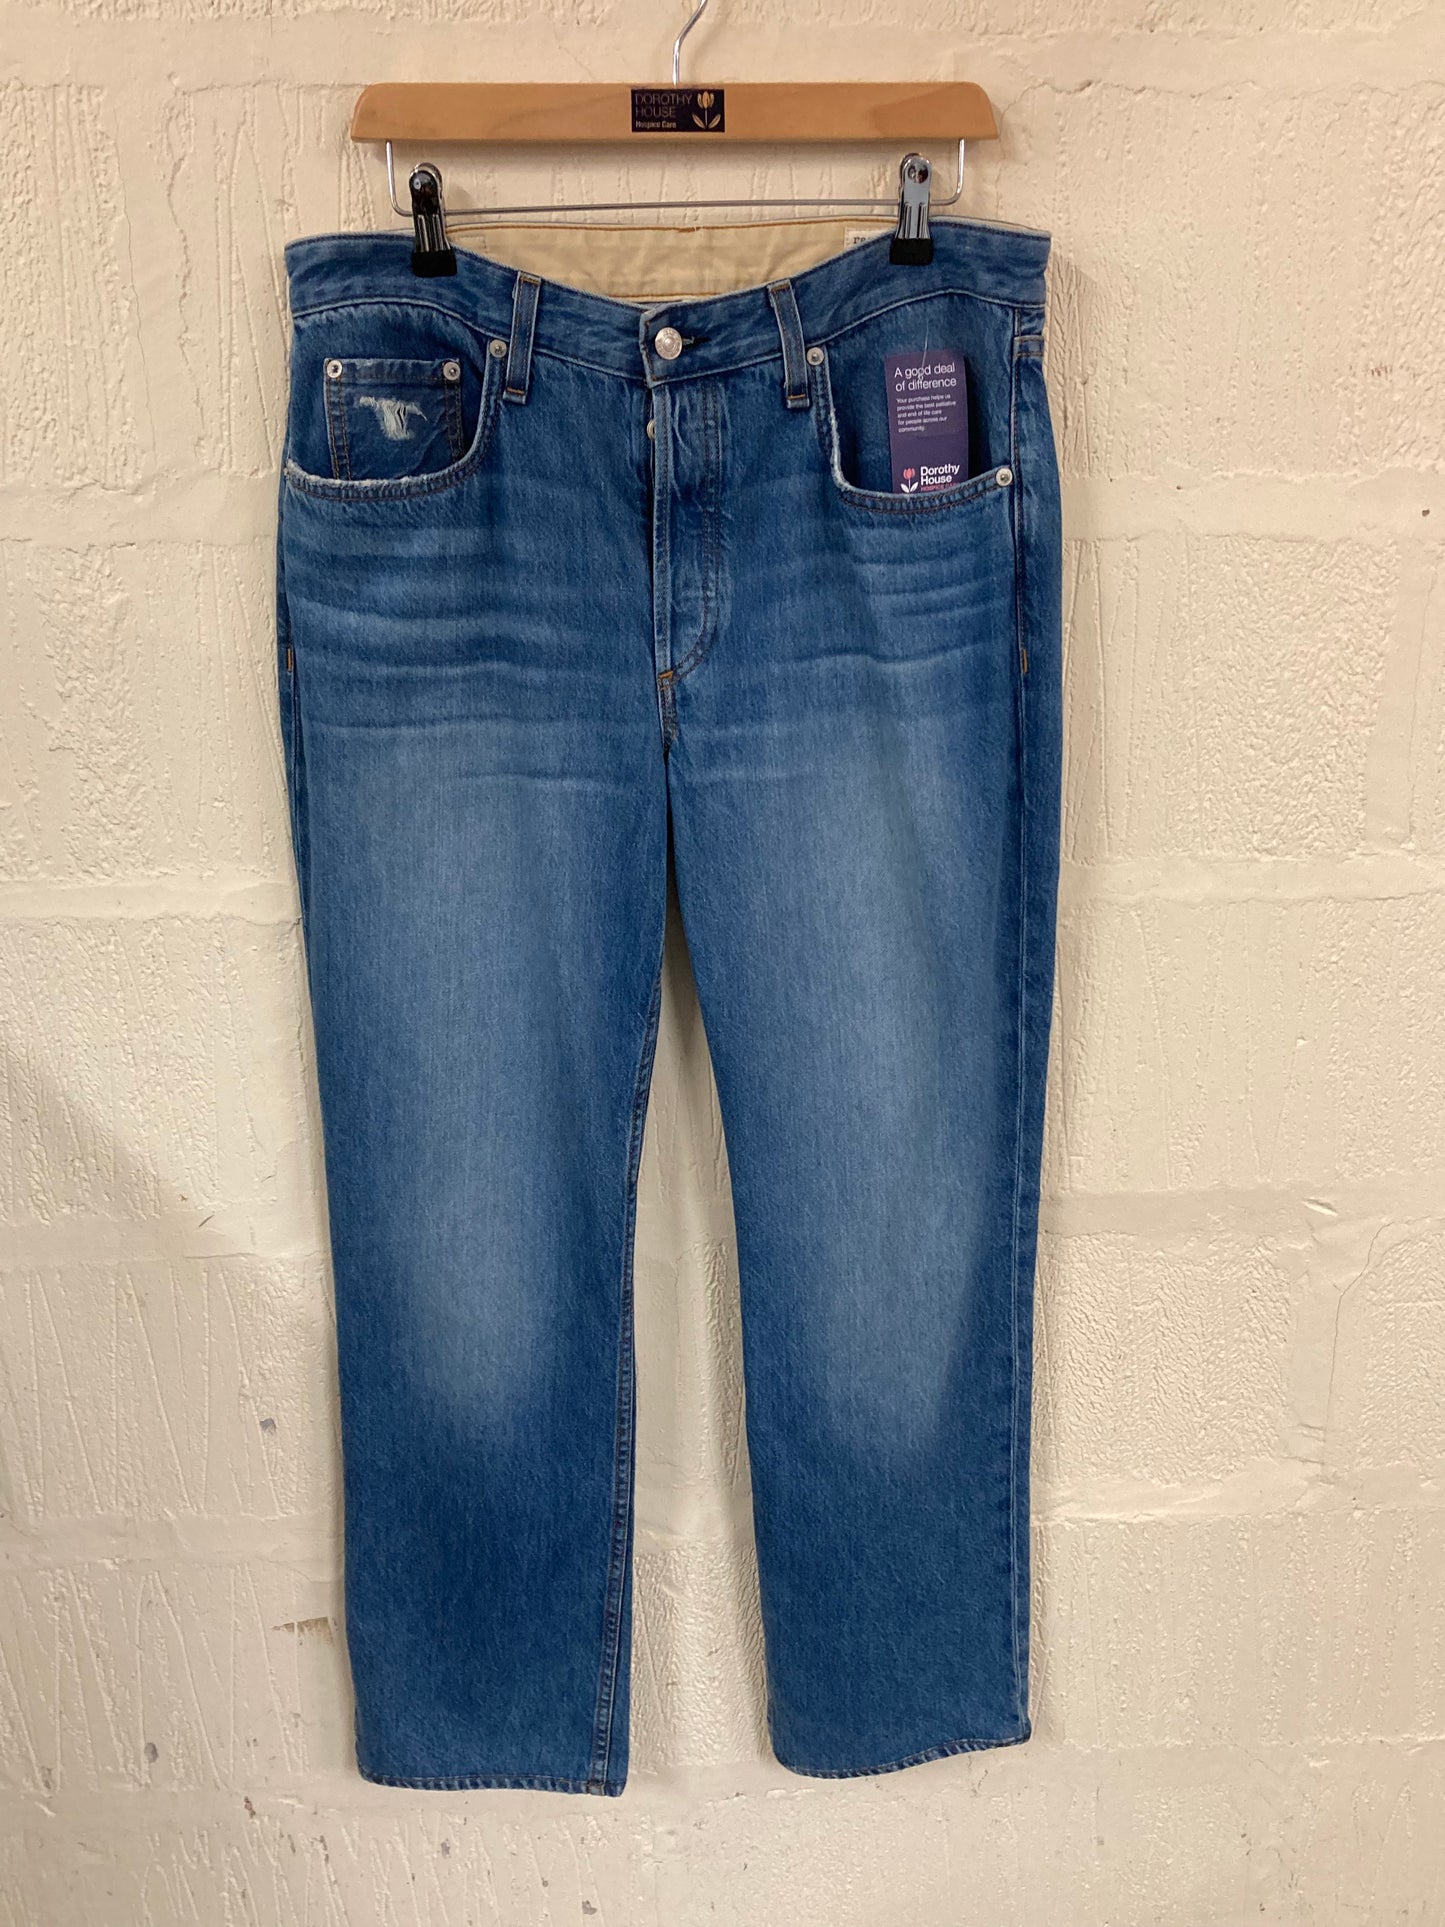 1990s Style Rag and Bone Denim Wide and Low Waist Jeans  Size 30, Size 12